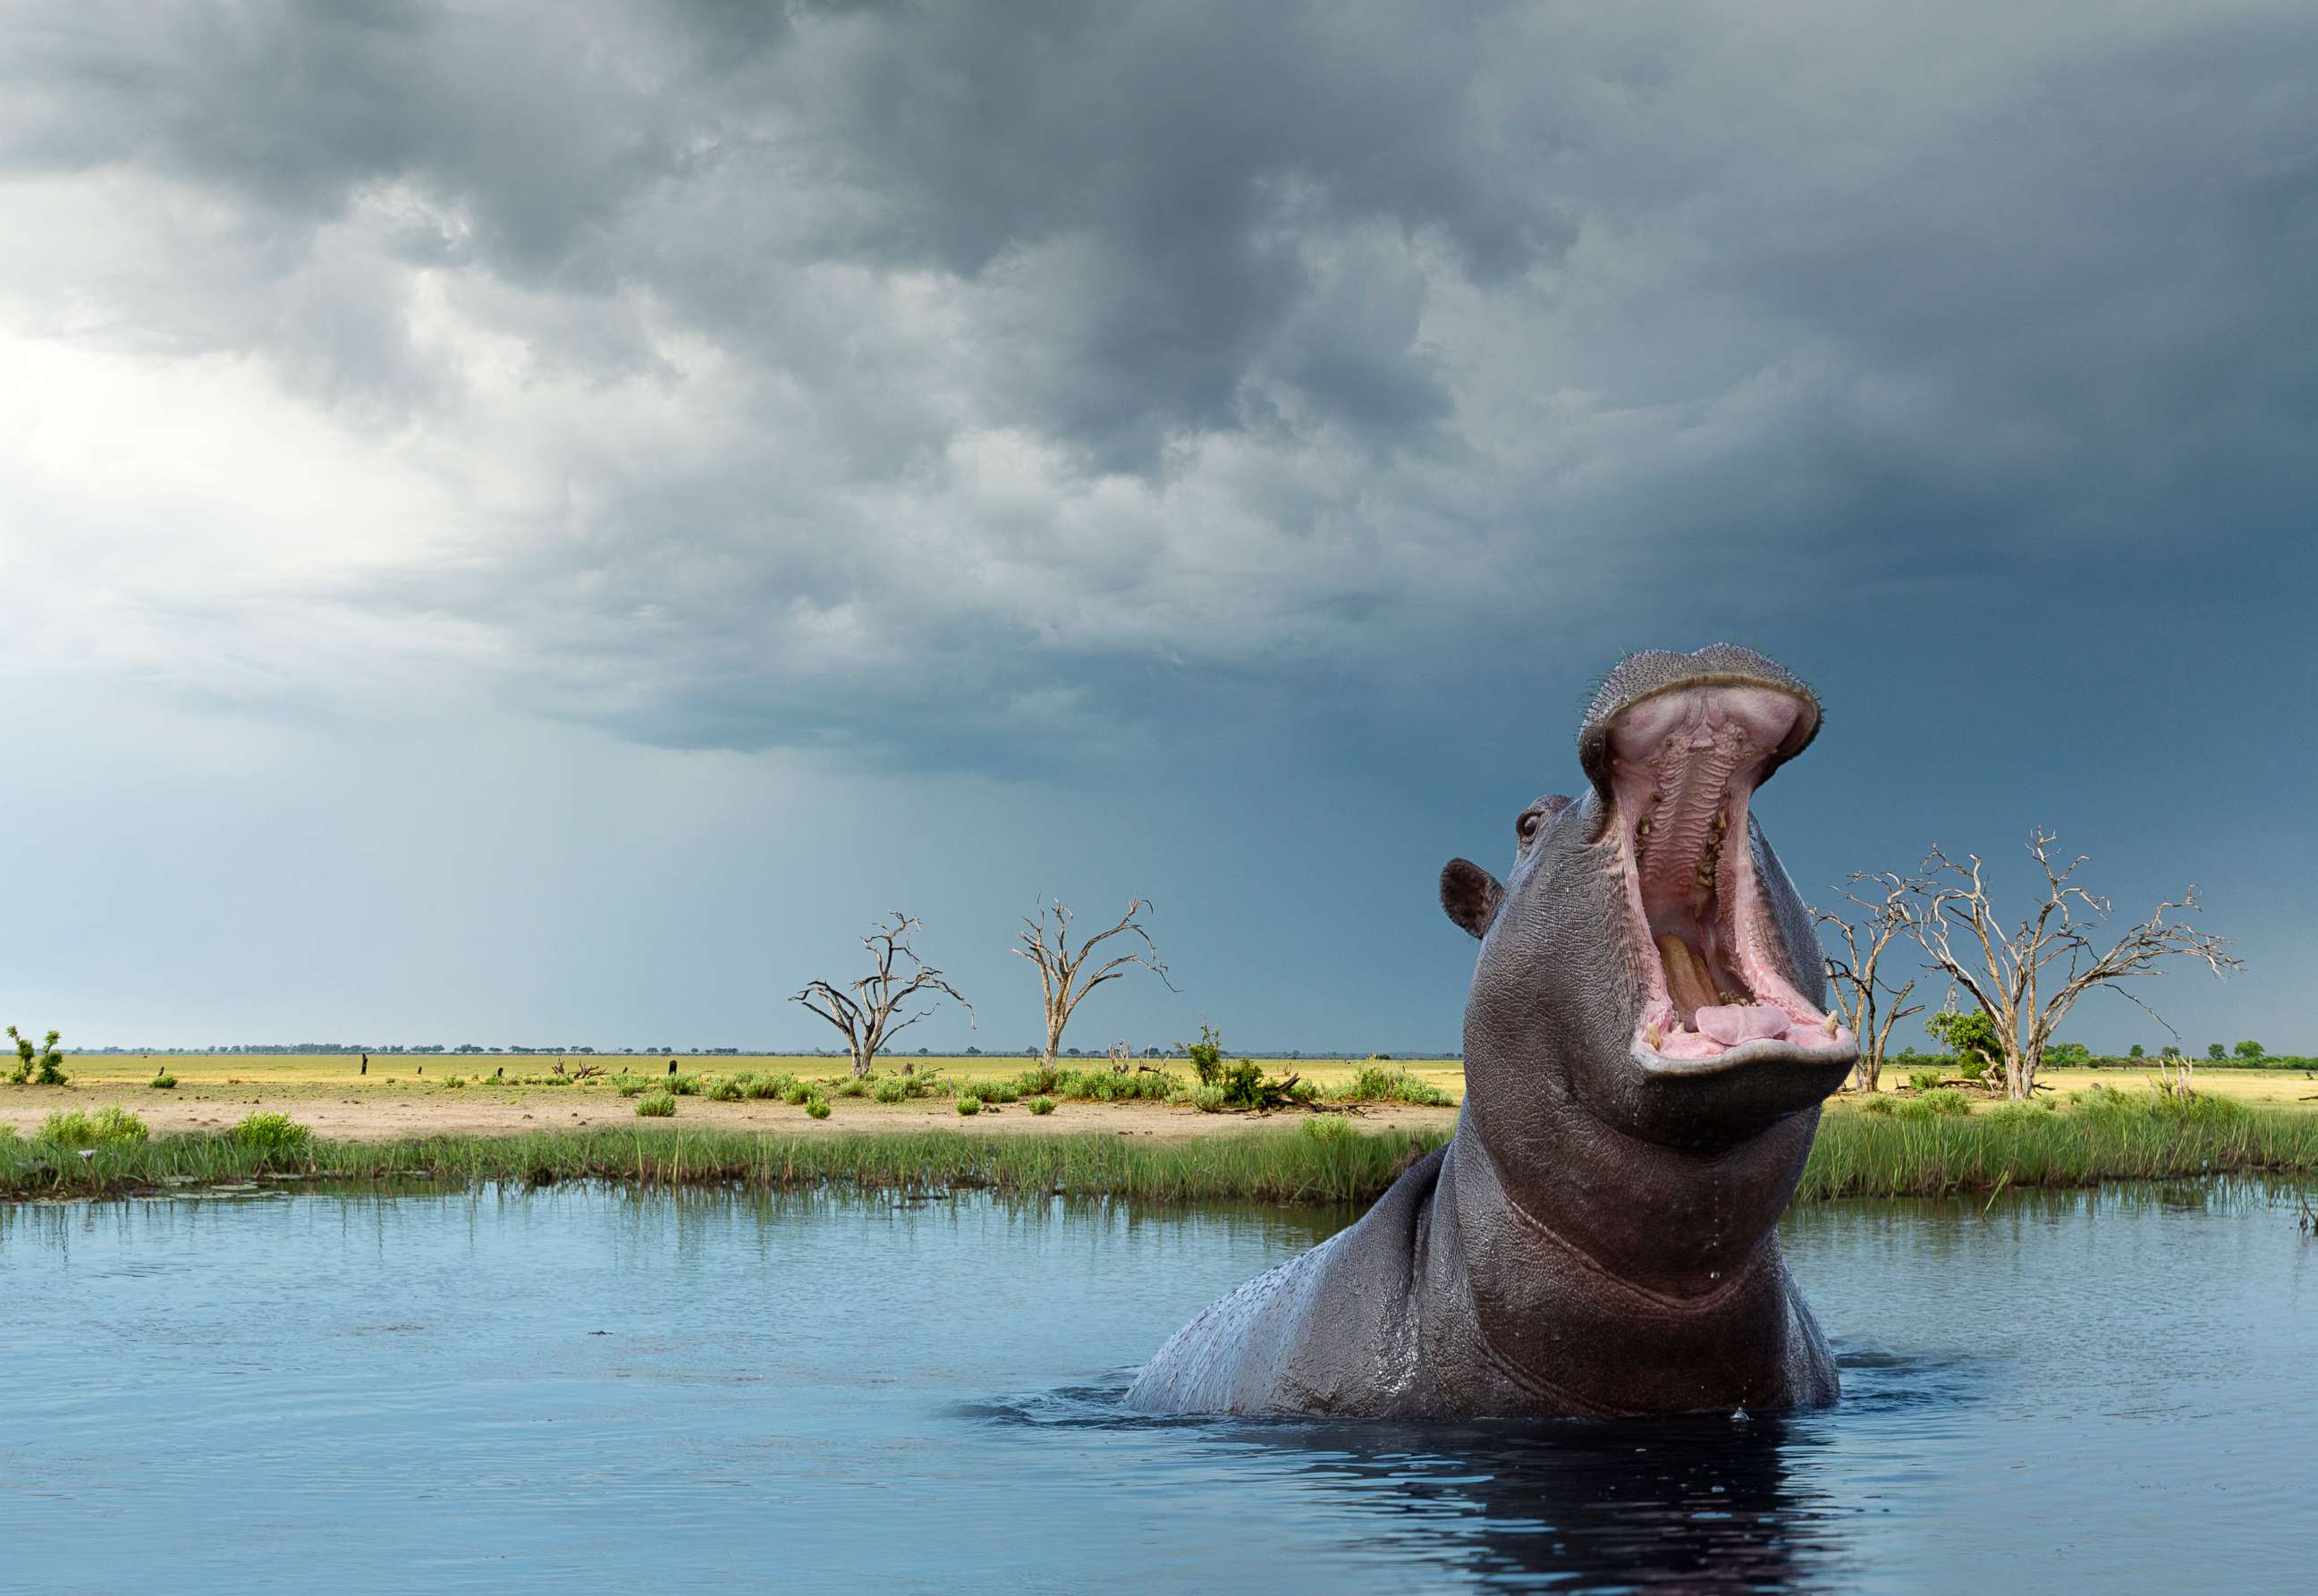 PHOTO: An African hippopotamus is seen in this stock photo.